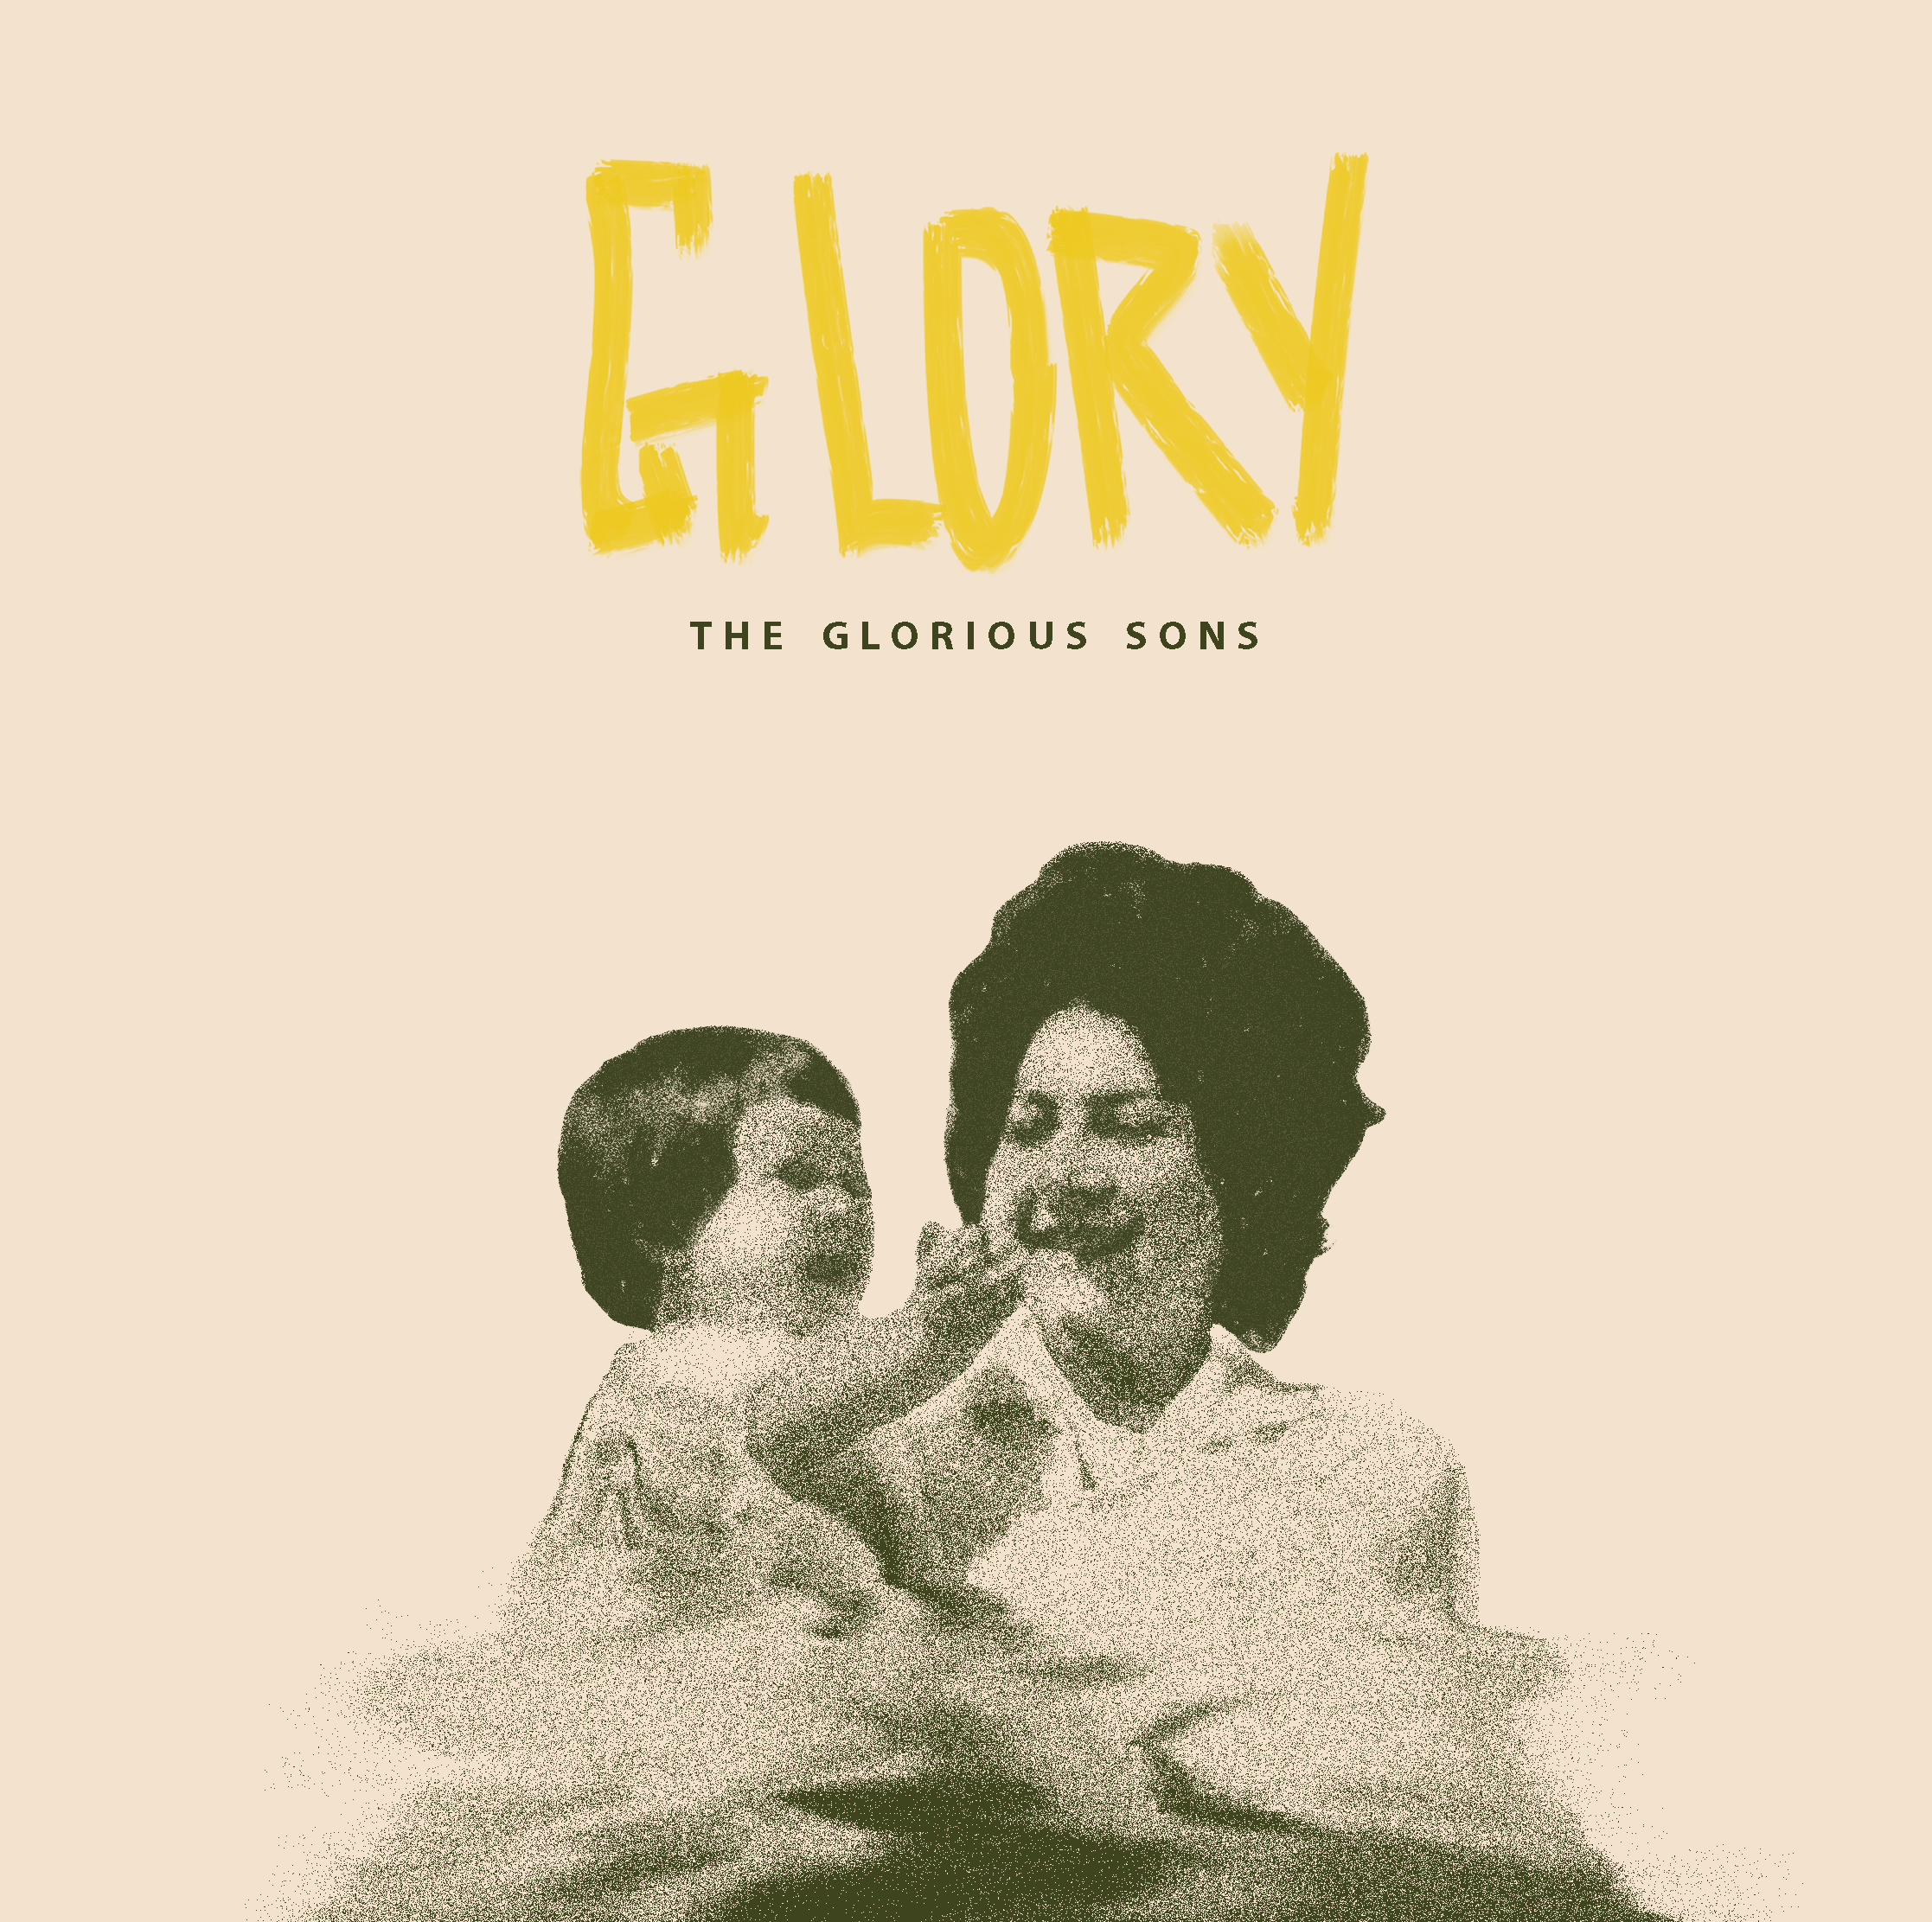 THE GLORIOUS SONS RELEASE FOURTH STUDIO ALBUM ‘GLORY’